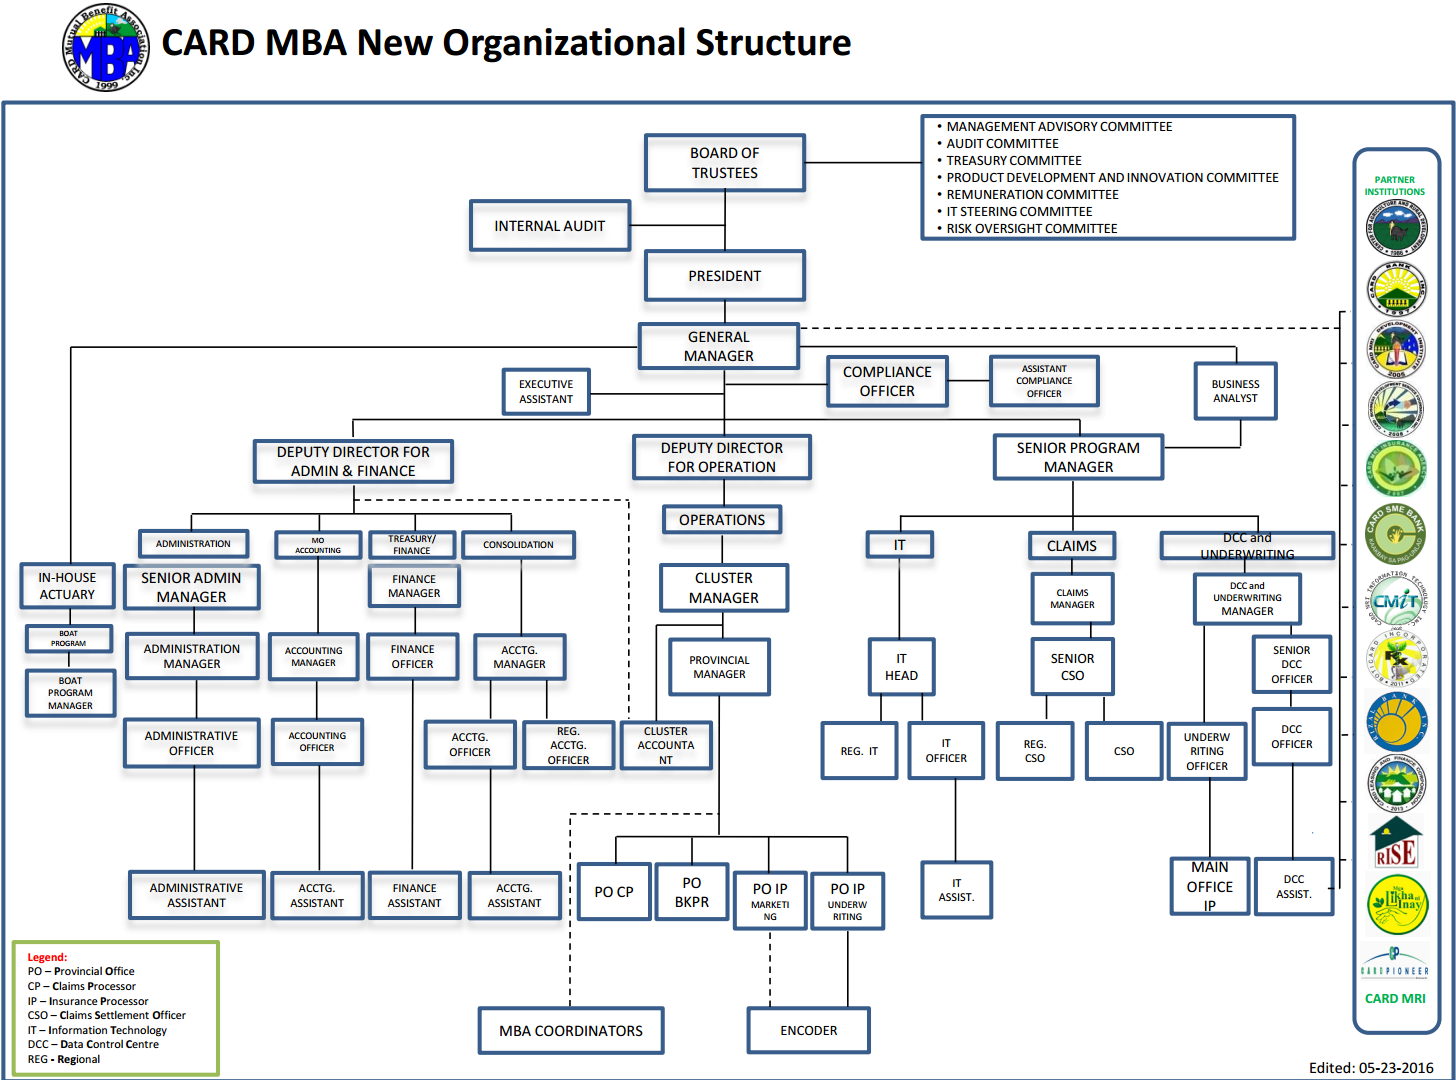 CARD MBA ORGANIZATIONAL STRUCTURE - 2023